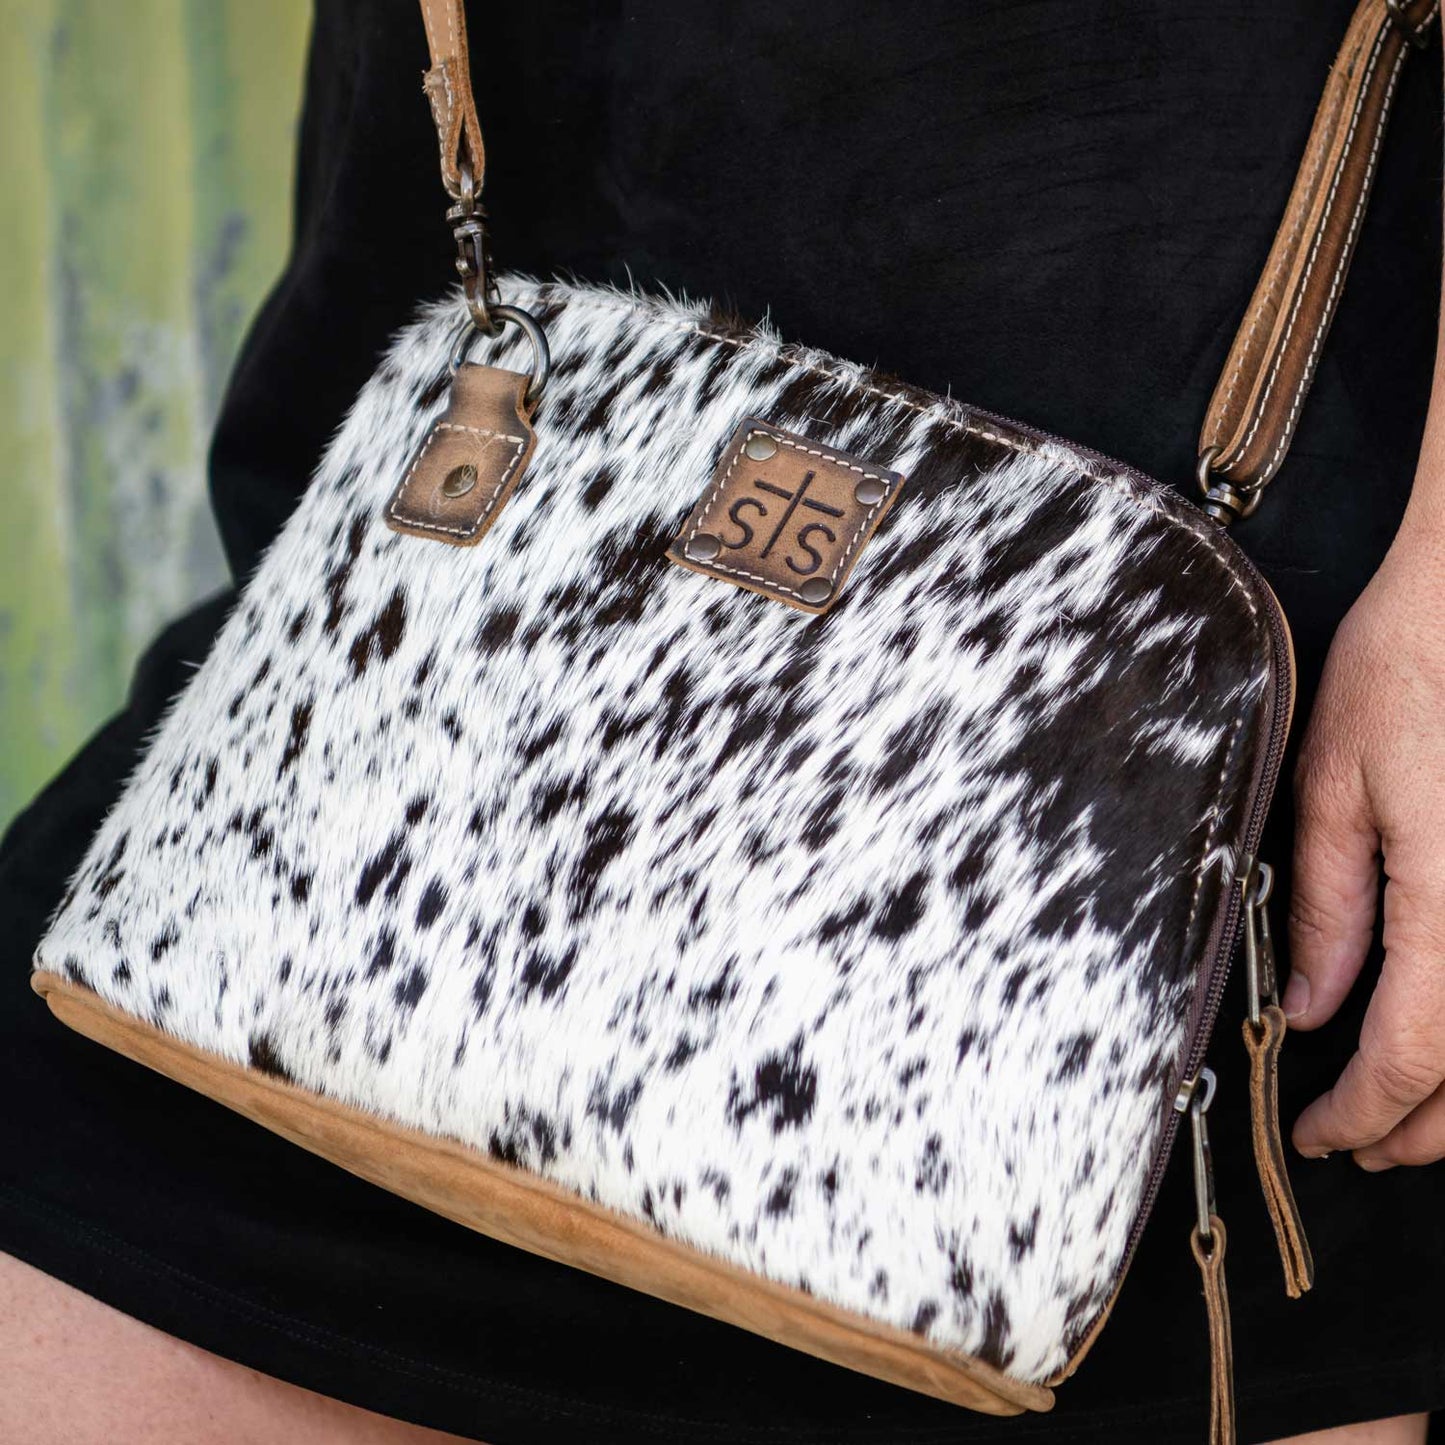 Basic Bliss Cowhide Lucy Crossbody By STS – Indian Traders (L7 Enterprises)